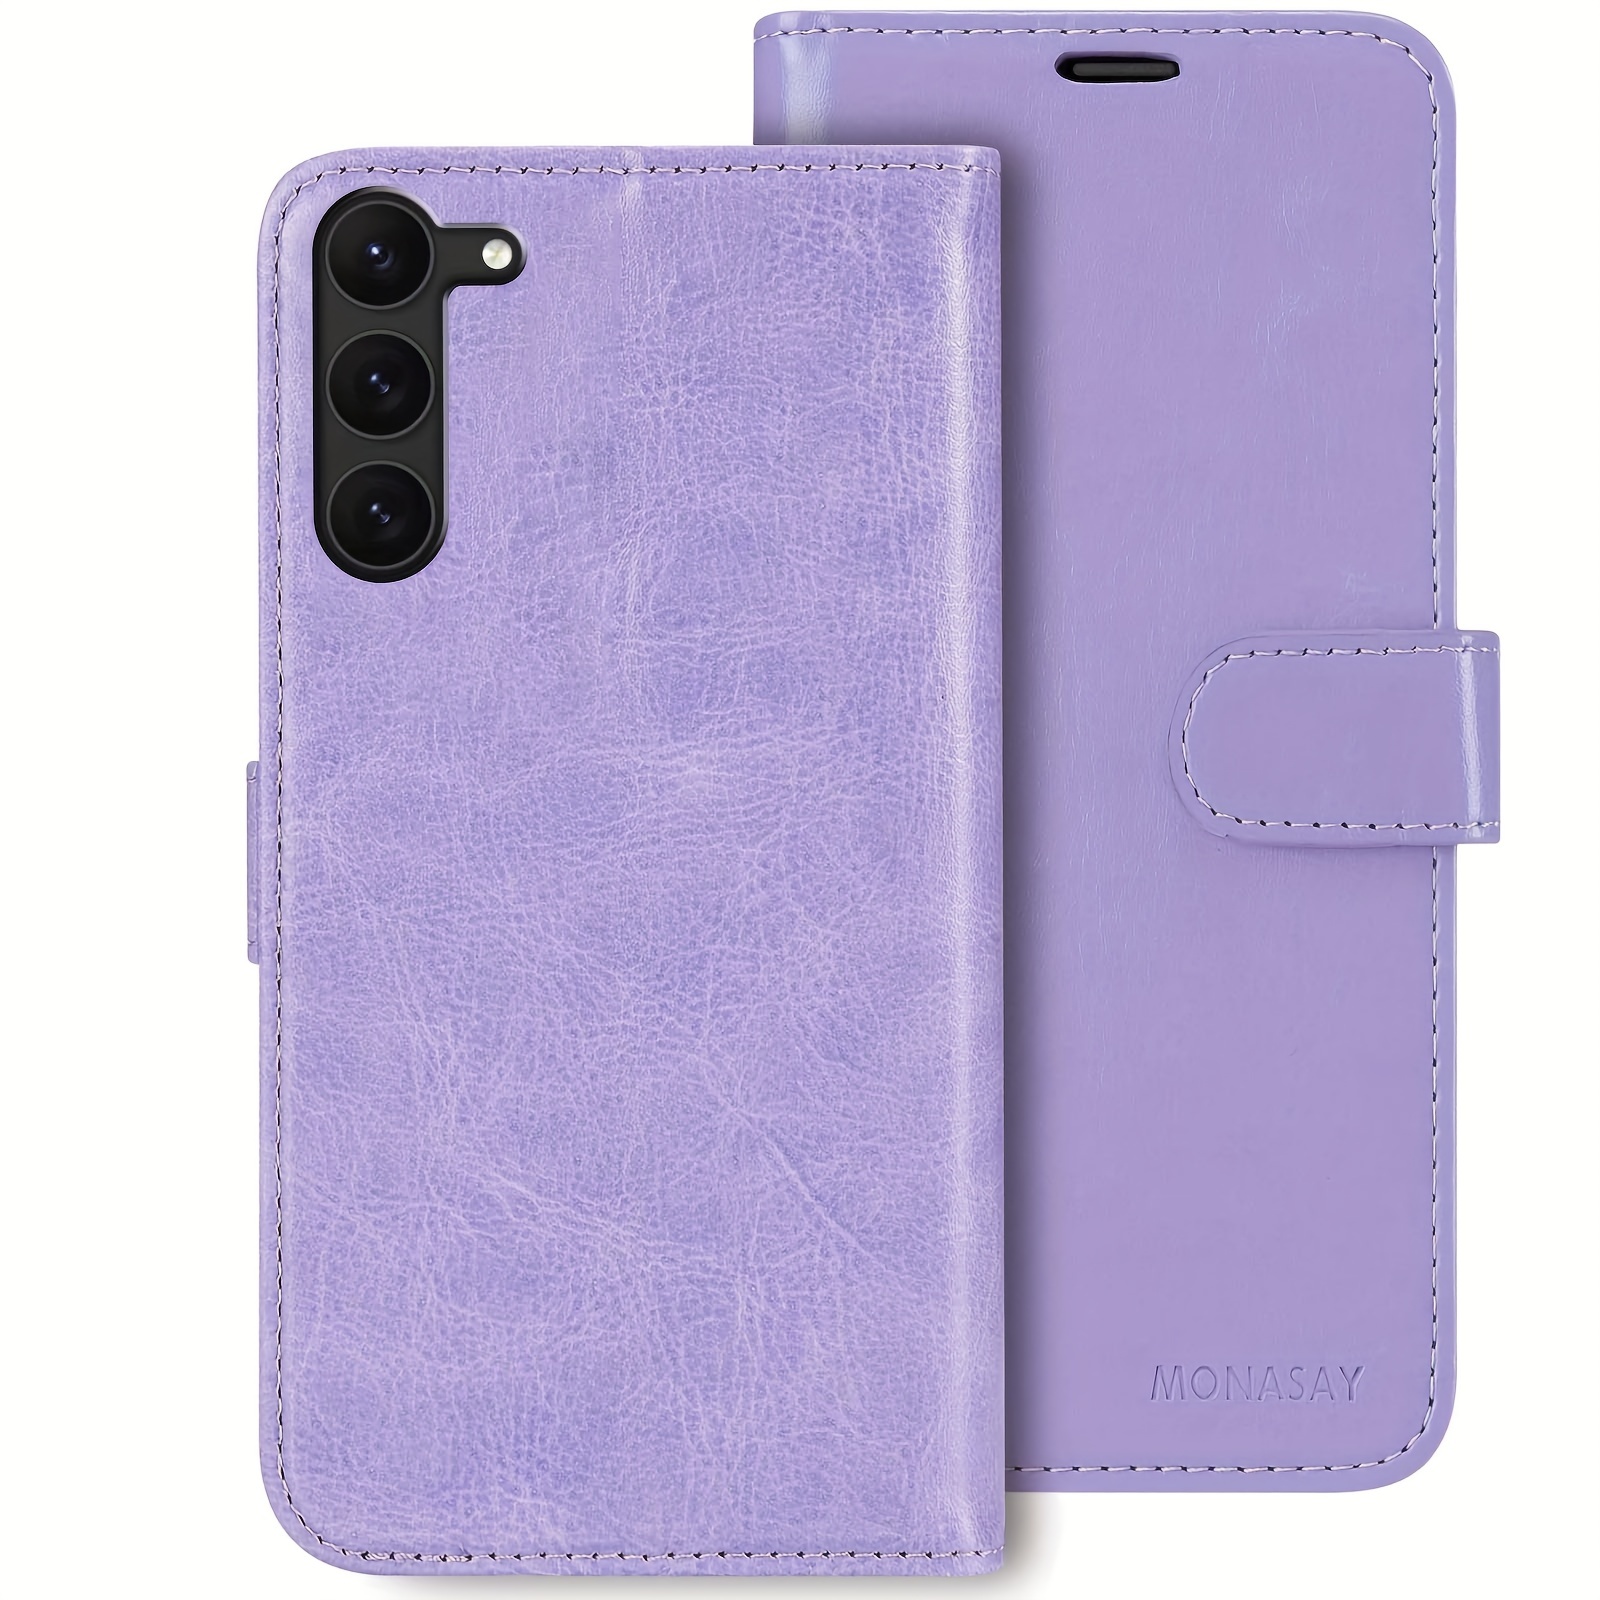 wallet case for galaxy s8 s9 s10 s10e s10 plus s20 s20 fe s20 plus s20 ultra s21 s21 fe s21 ultra s21 plus s22 s22 plus s22 ultra s23 s23 plus s23 ultra screen protector included faux leather cell phone cover